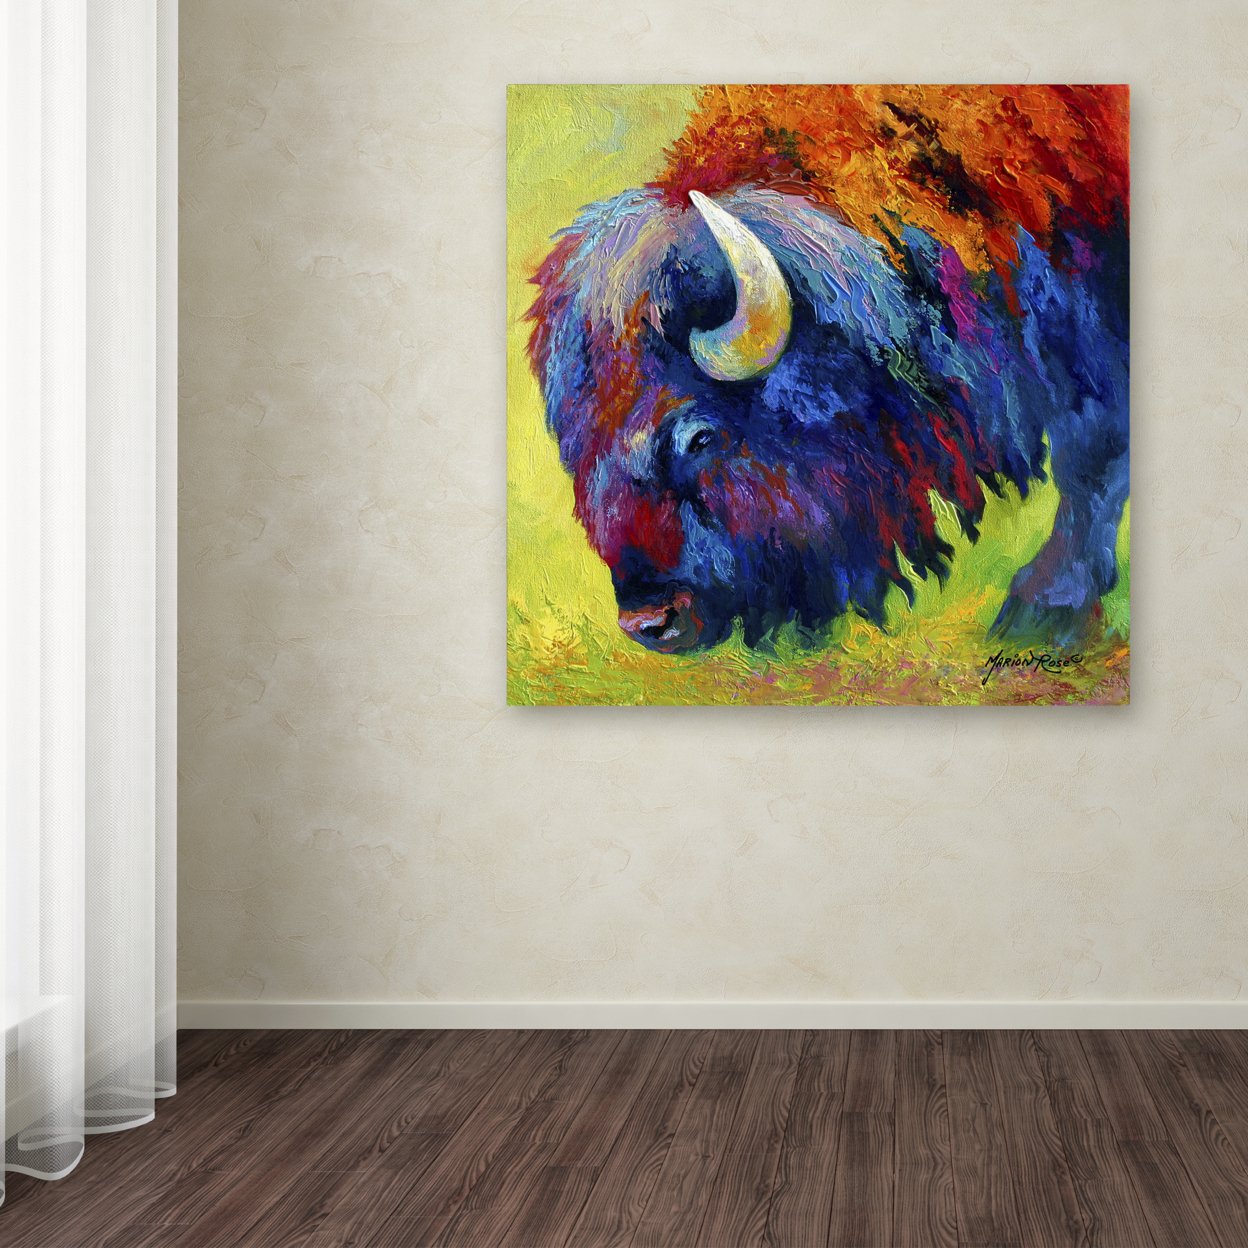 Marion Rose 'Bison Portrait II' Ready To Hang Canvas Art 24 X 24 Inches Made In USA